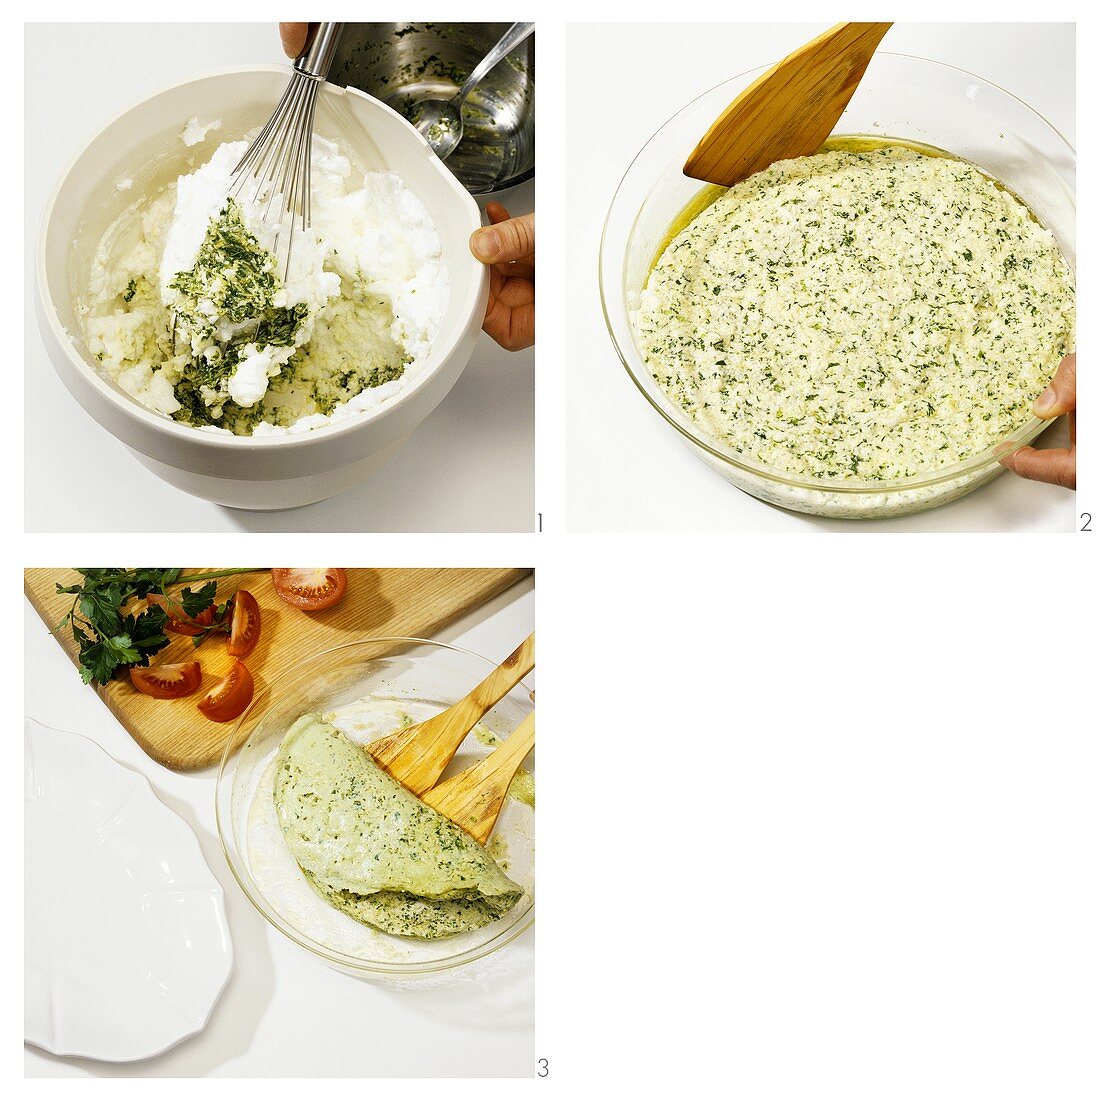 Making soufflé omelette with herbs